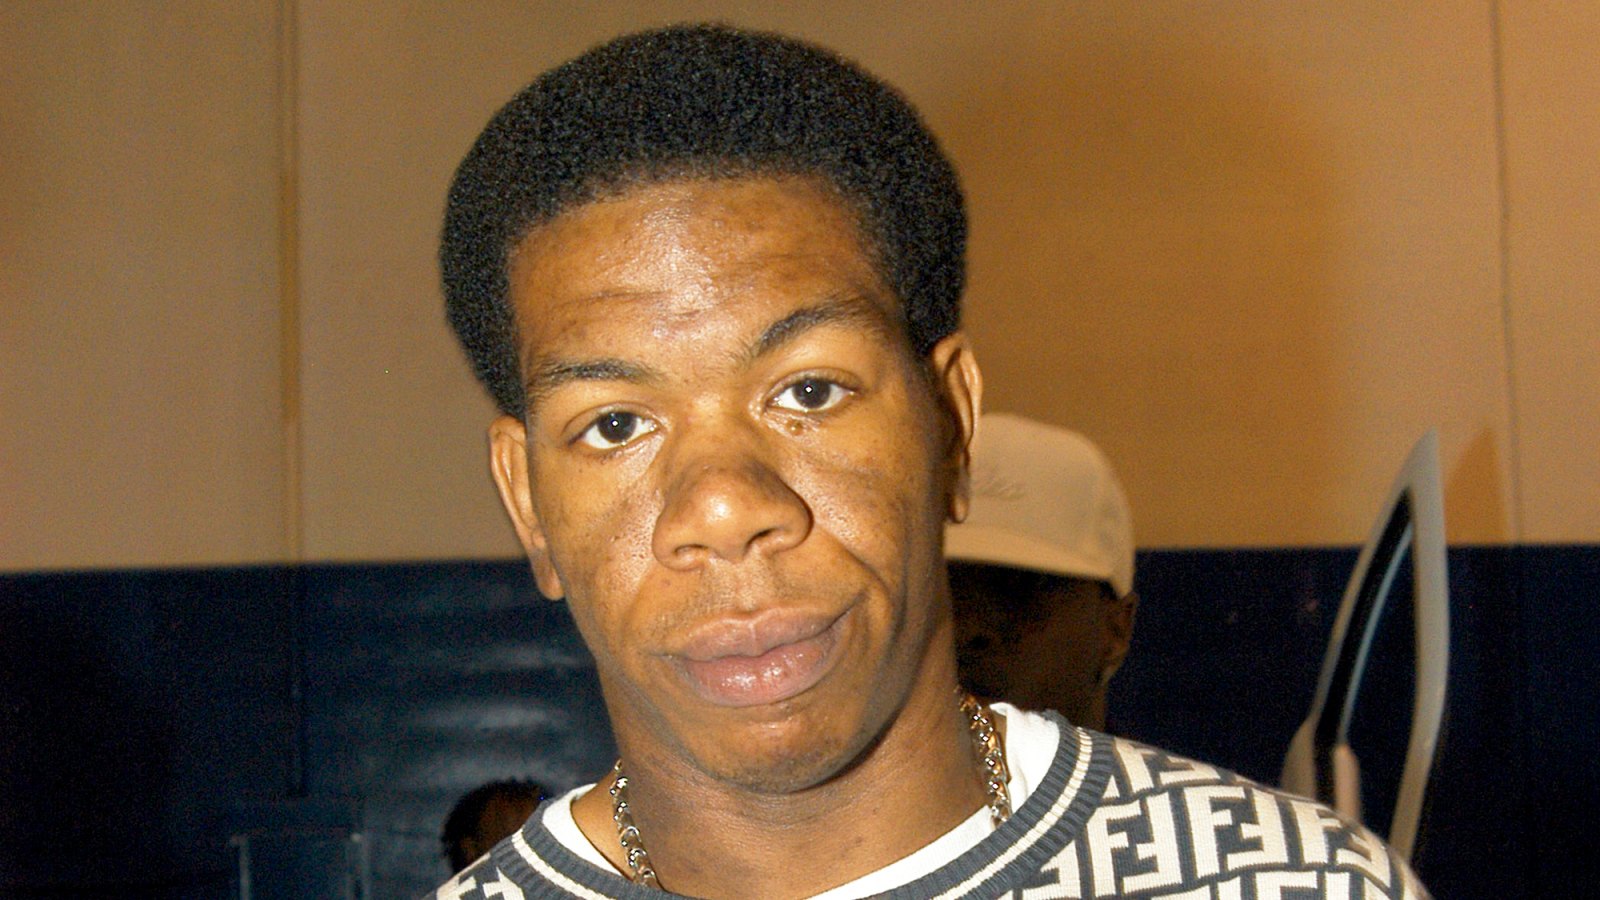 Rapper Craig Mack attends Power 105.1 & Wyclef Jean Present The 2004 Custom Car And Bike Show at Nassau Coliseum in New York.